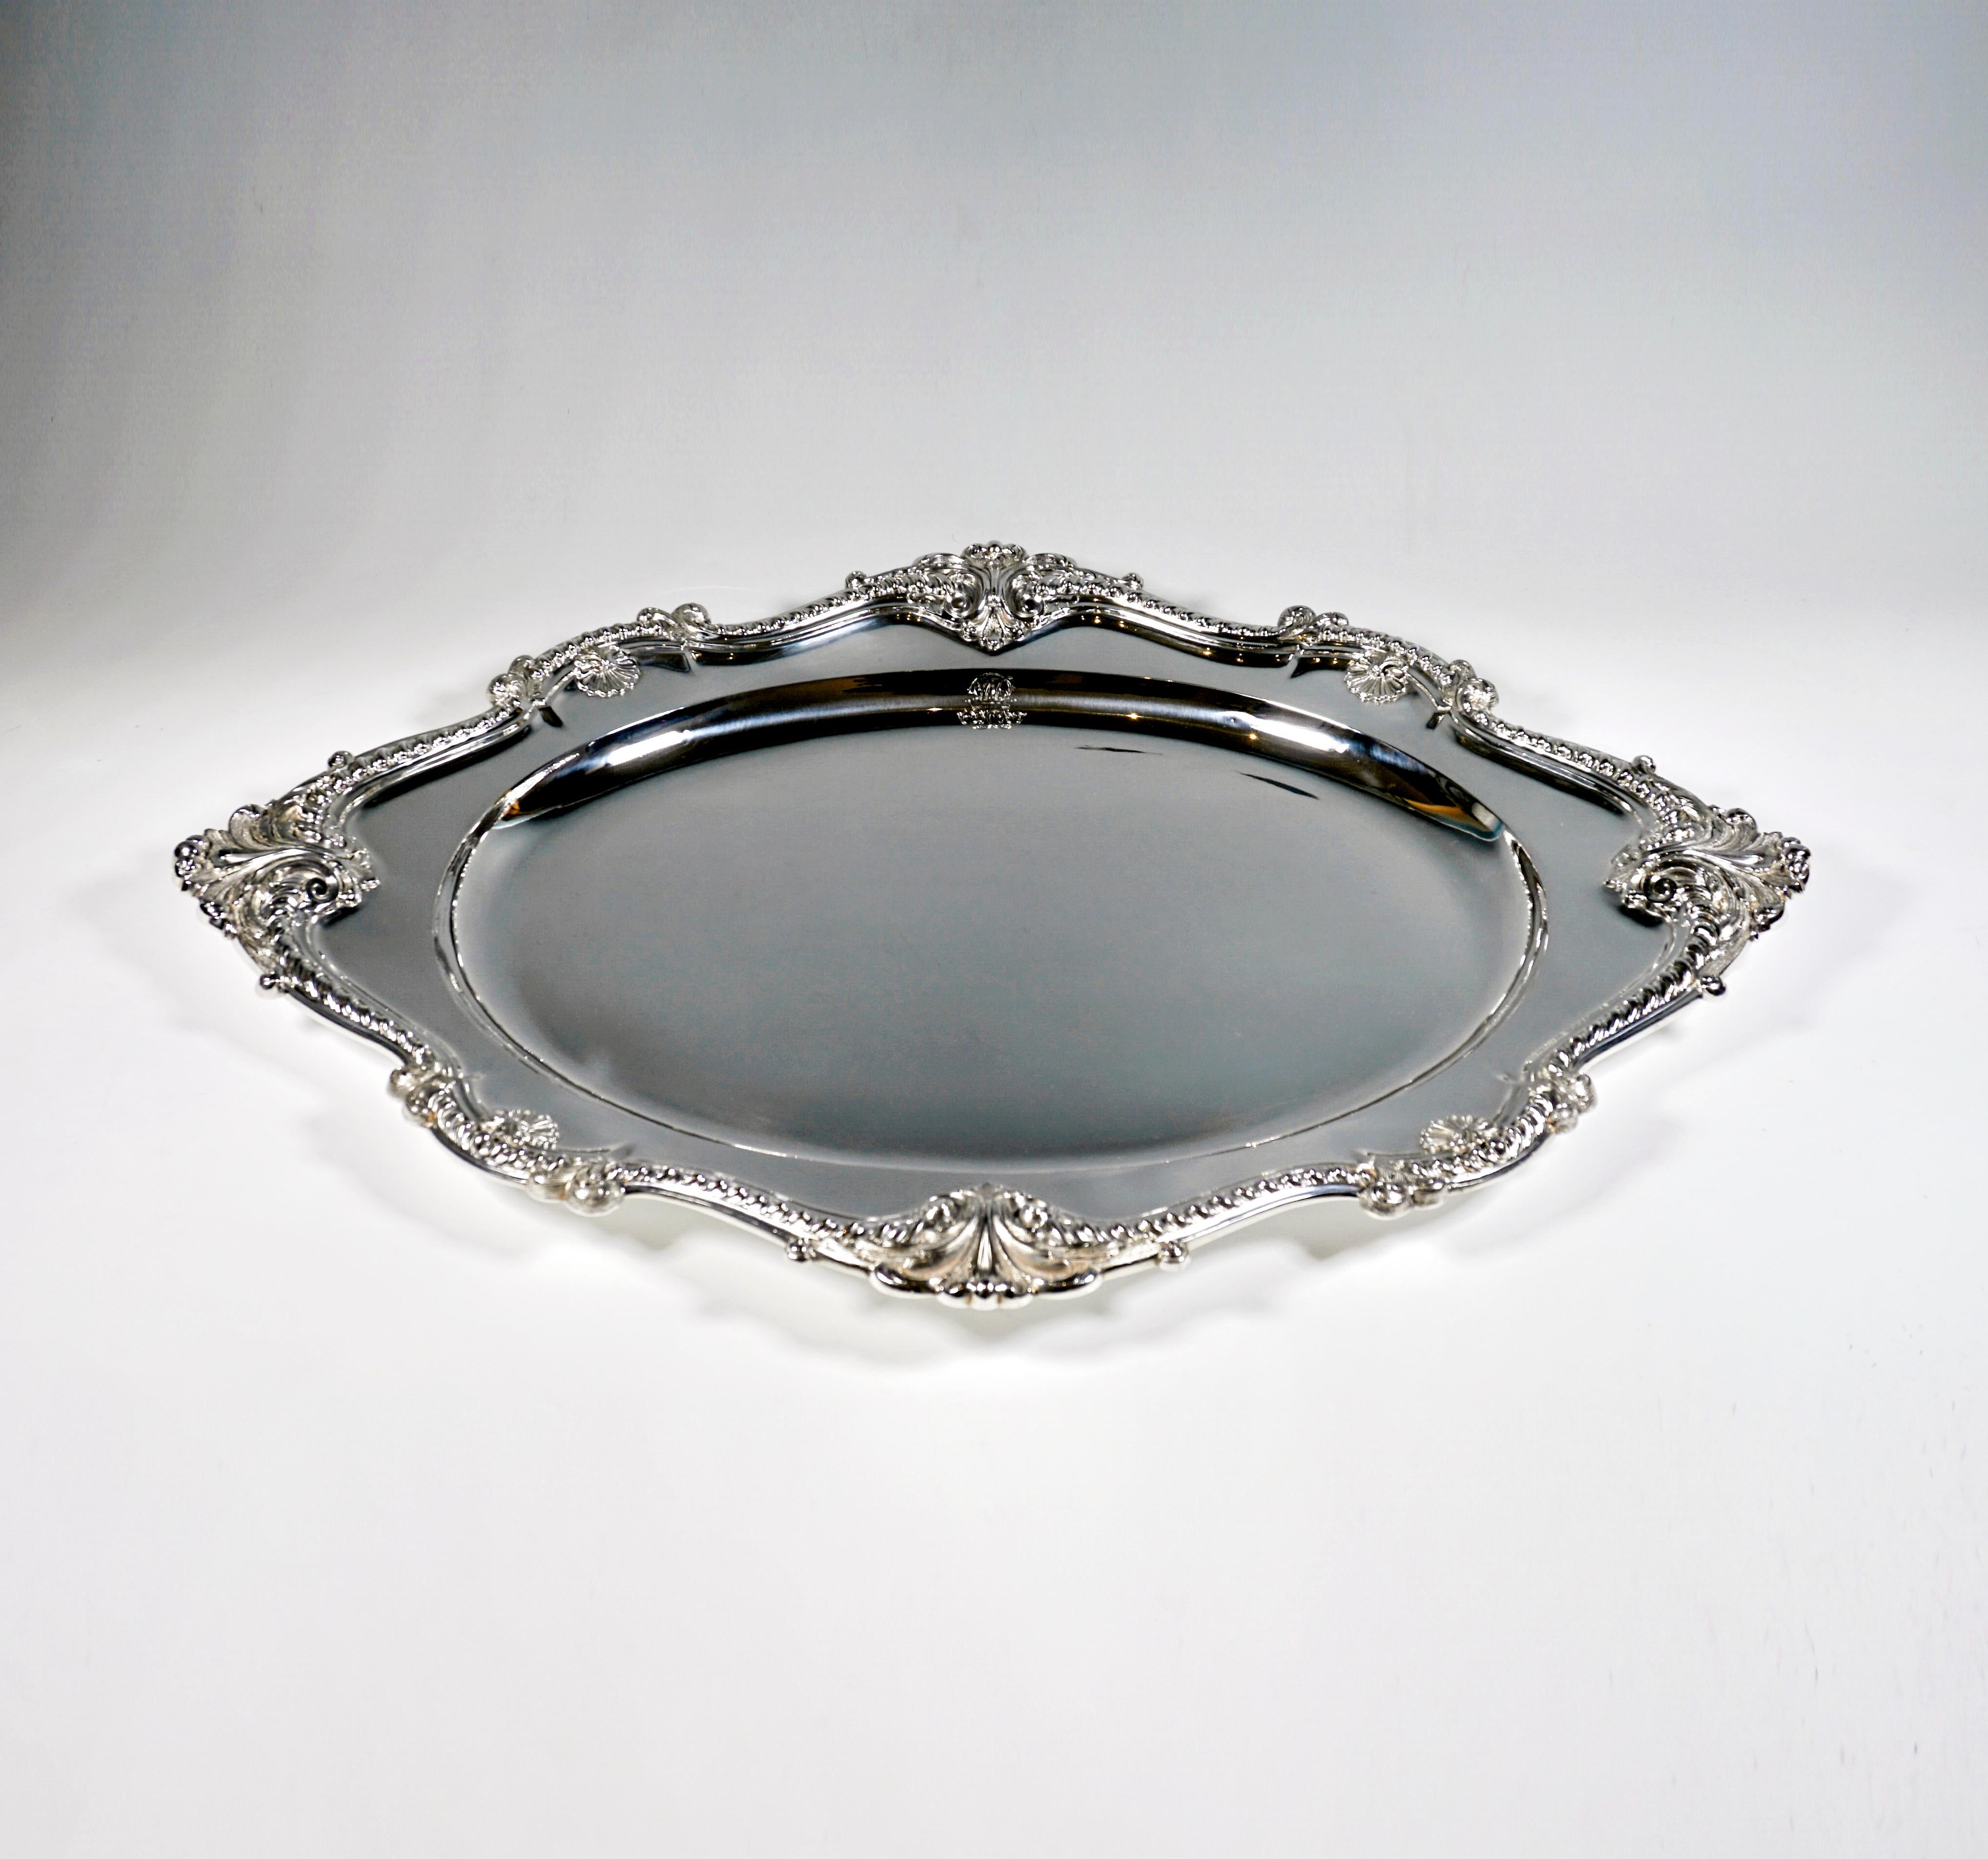 Solid silver tray with an oval mirror, the edge expanding into a diamond shape with surrounding cord, volute and rocaille decorations.

Hallmarks:
Diana's head - Austrian official hallmark 1872-1922 for 900 Silver
'J.C.K' - Manufactory sign of